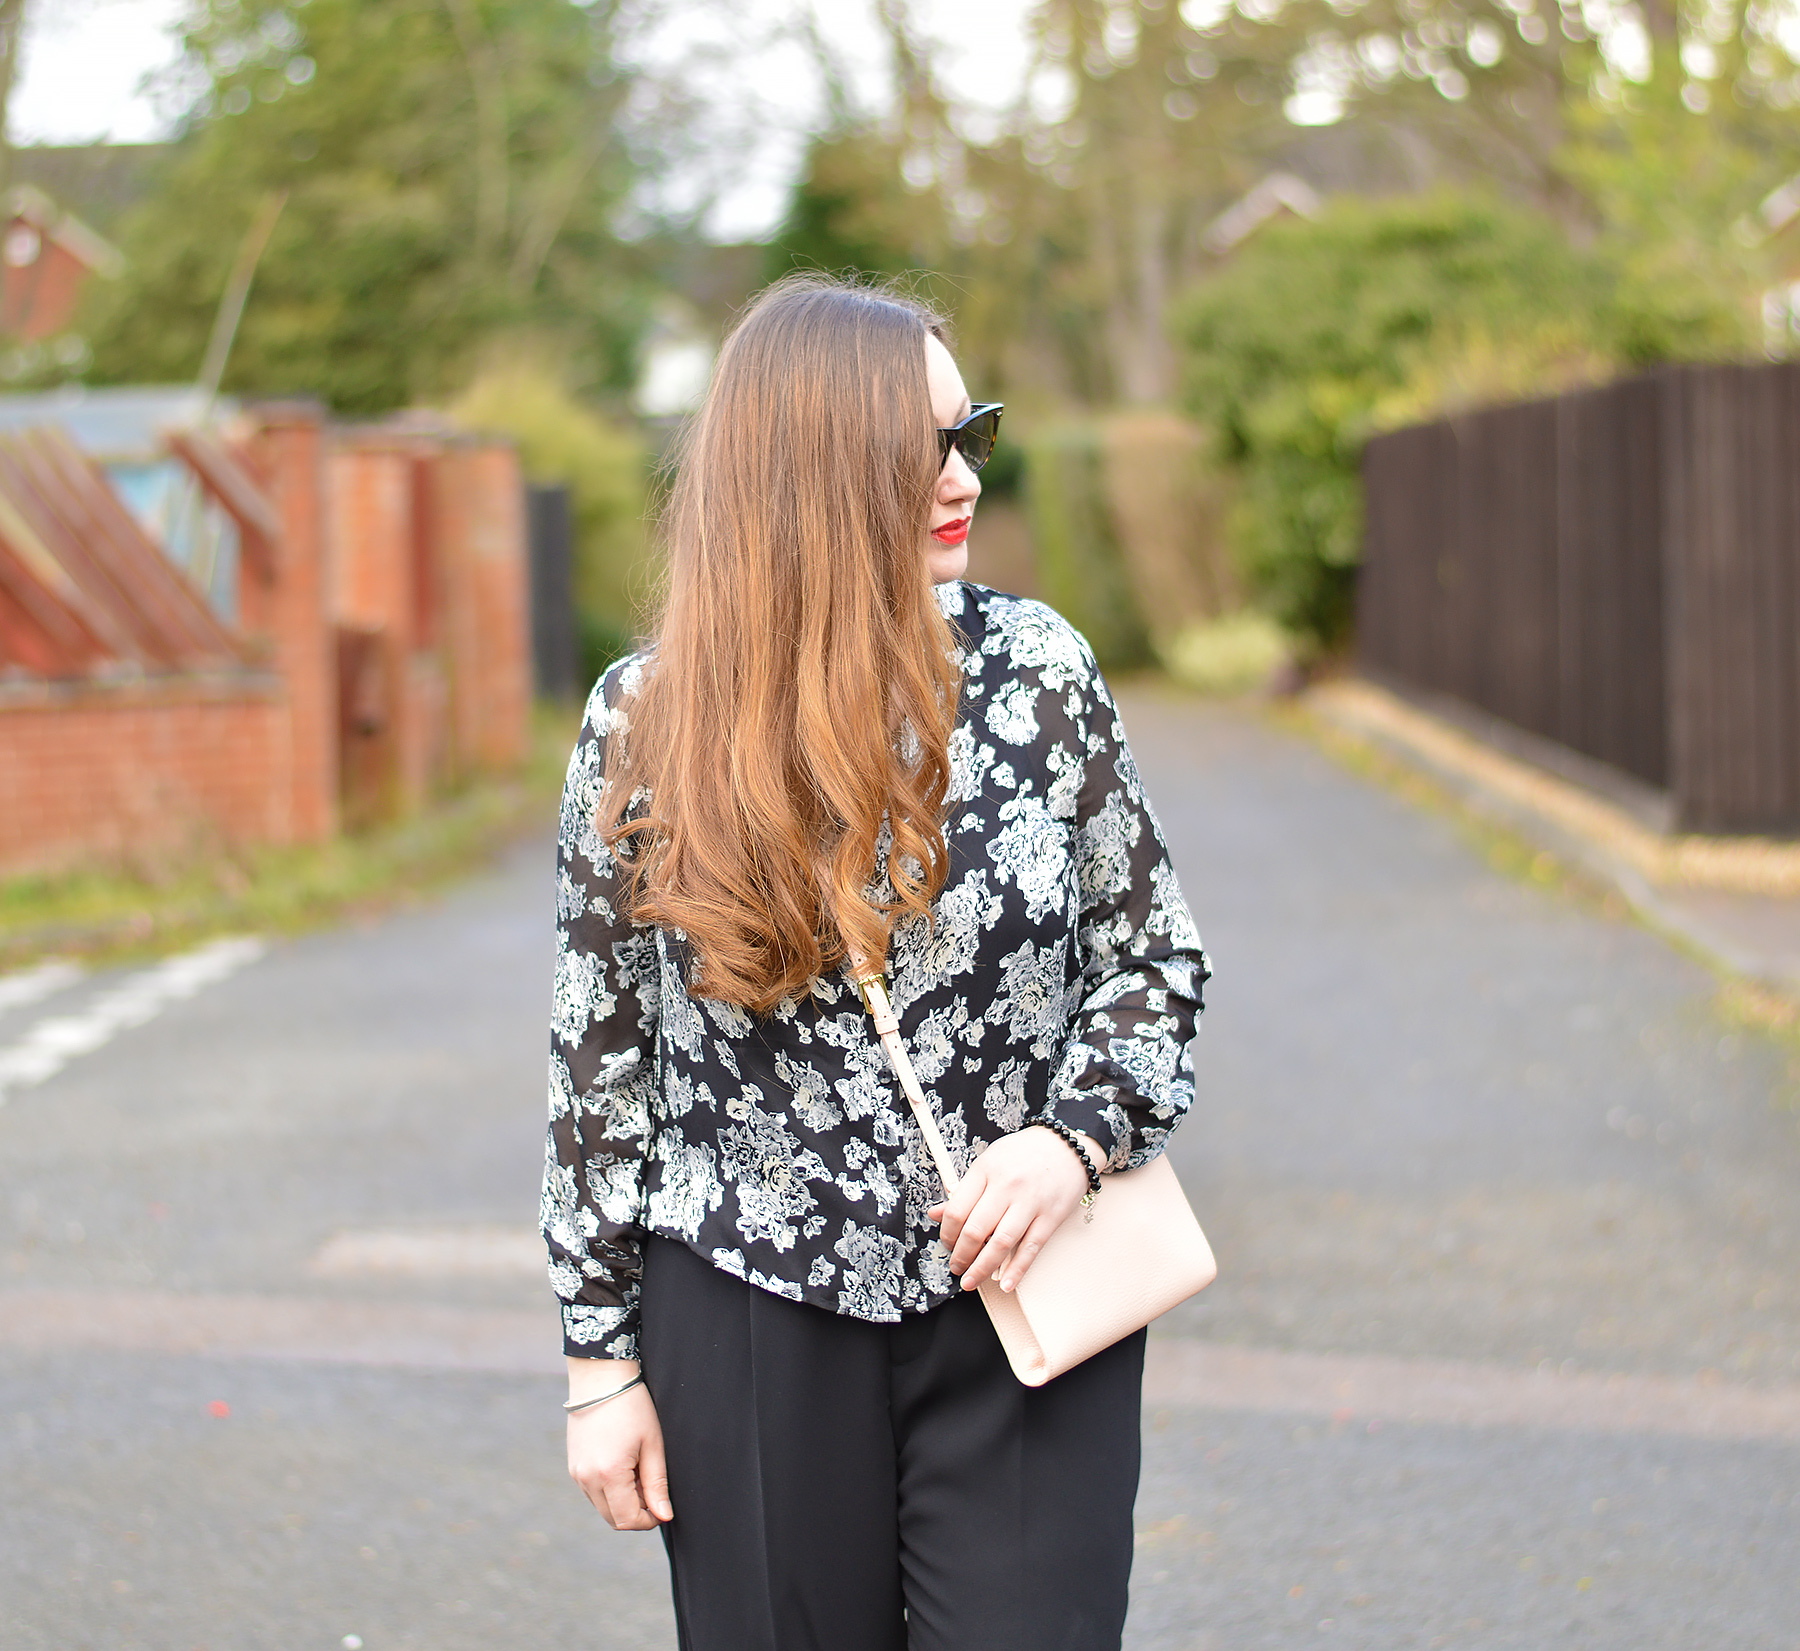 Black and white floral shirt outfit